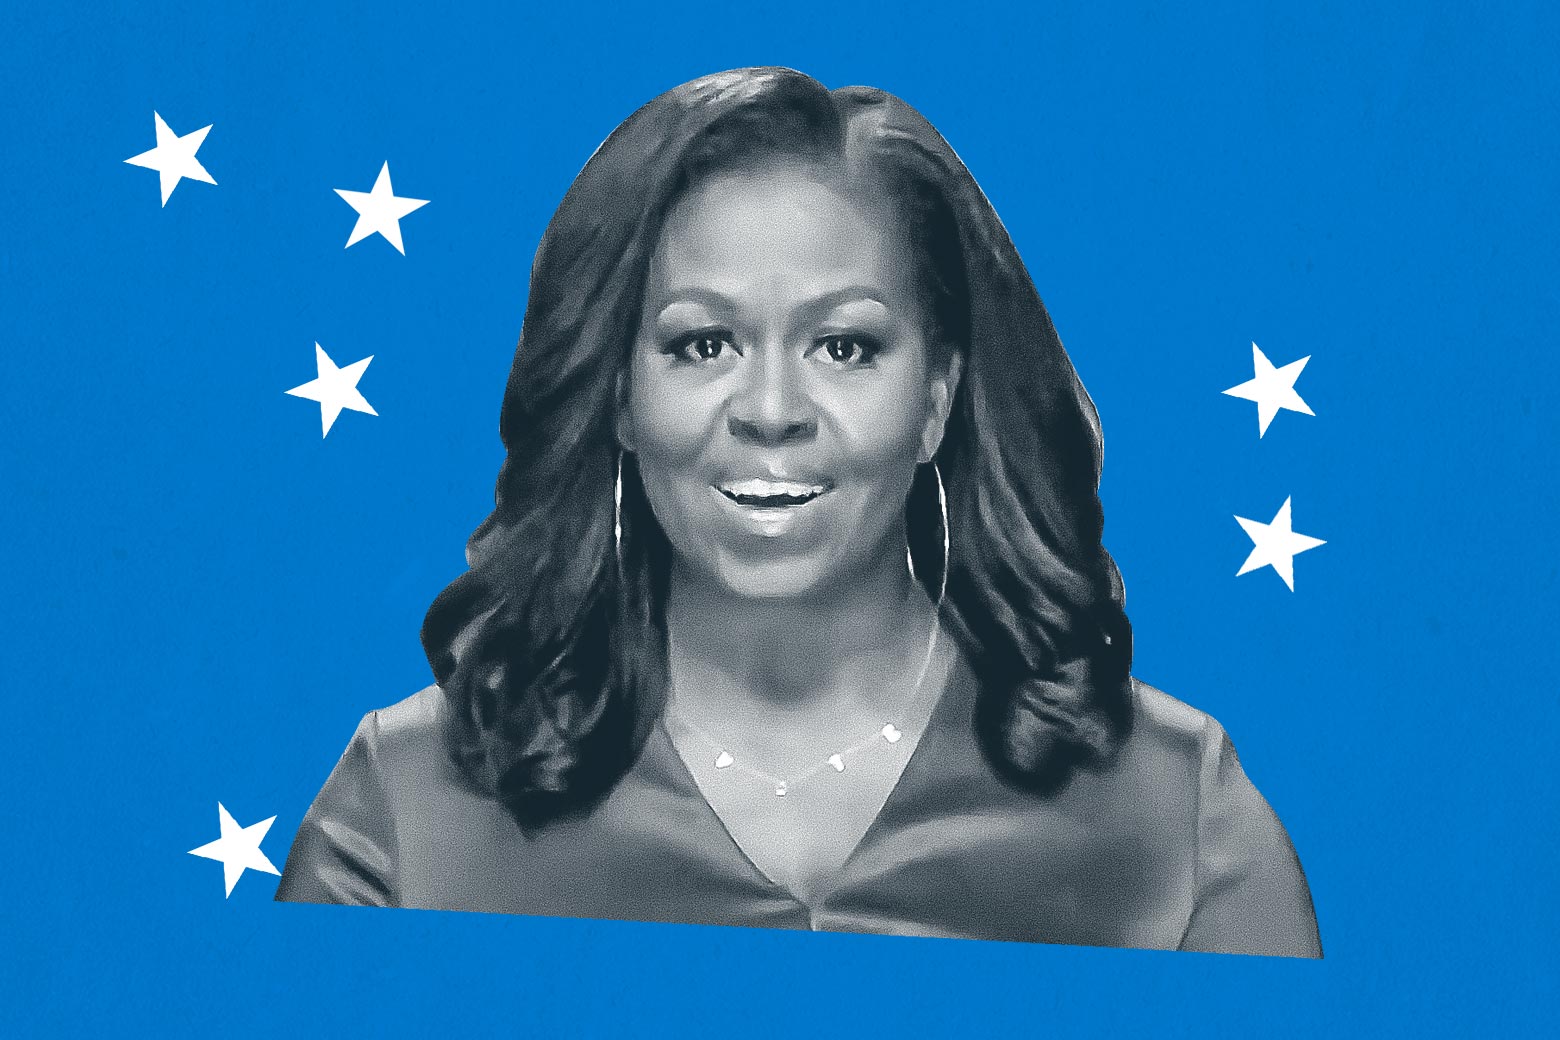 Michelle Obama speaking on video at the DNC